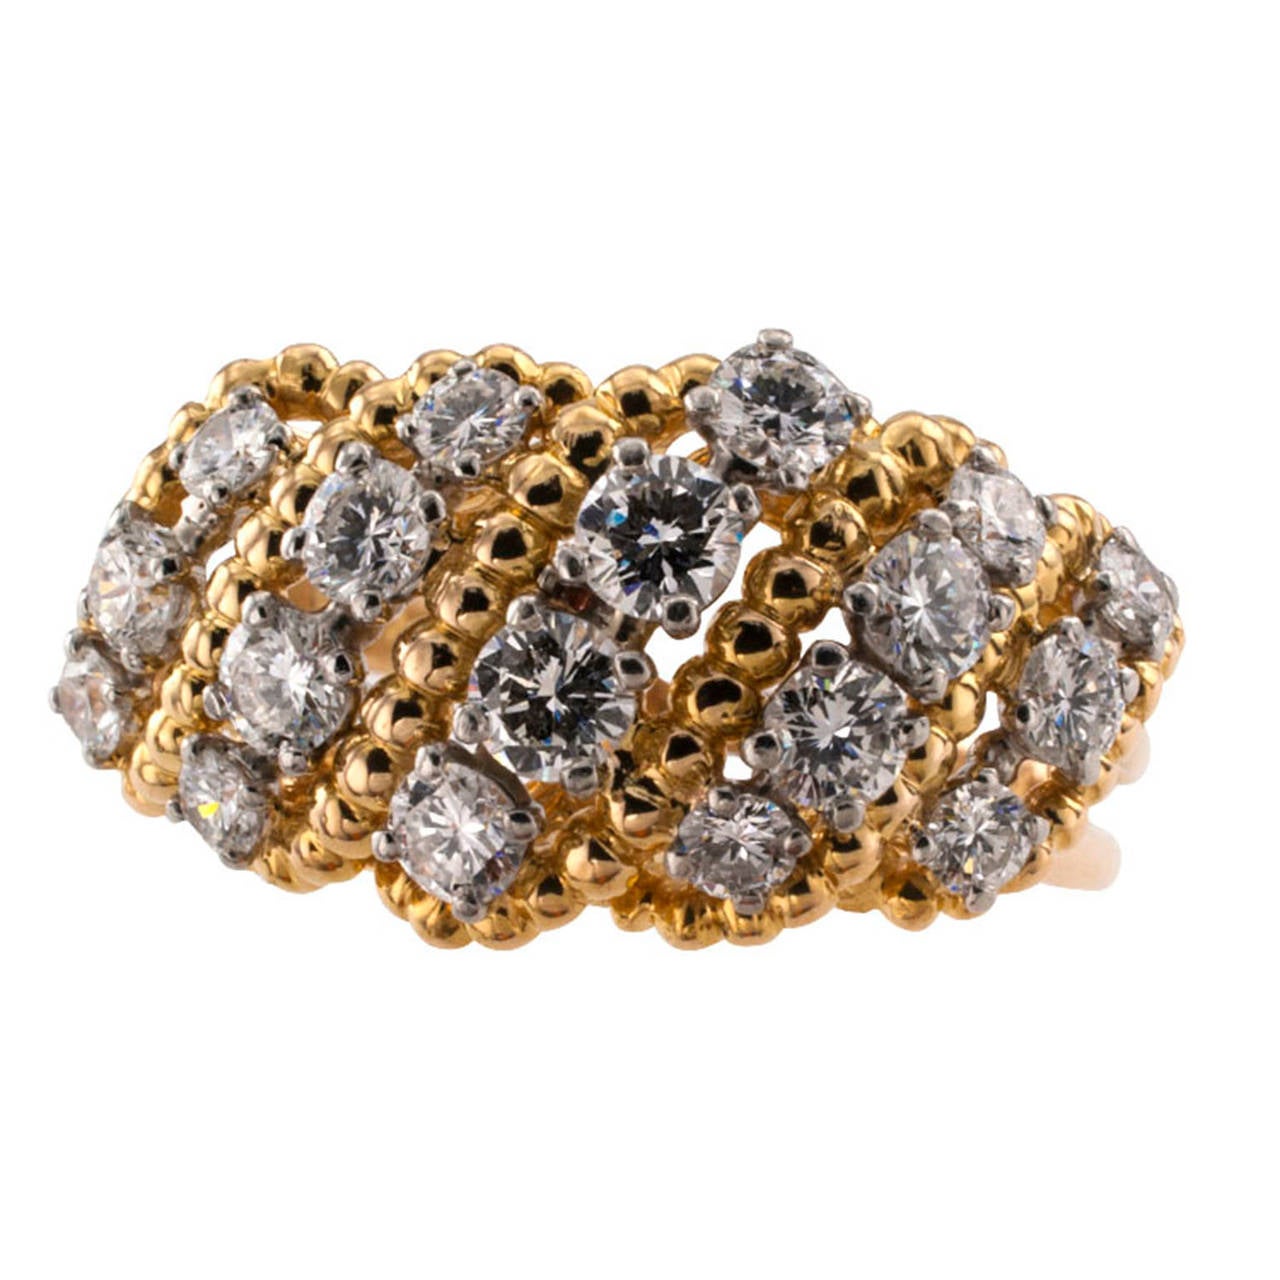 Oscar Heyman Diamond Ring

Slightly domed, this open work ring sparkles with 18, top grade, round brilliant-cut diamonds divided into five graduating platinum courses set across the ring between scrolling beaded gold motifs allowing plenty of